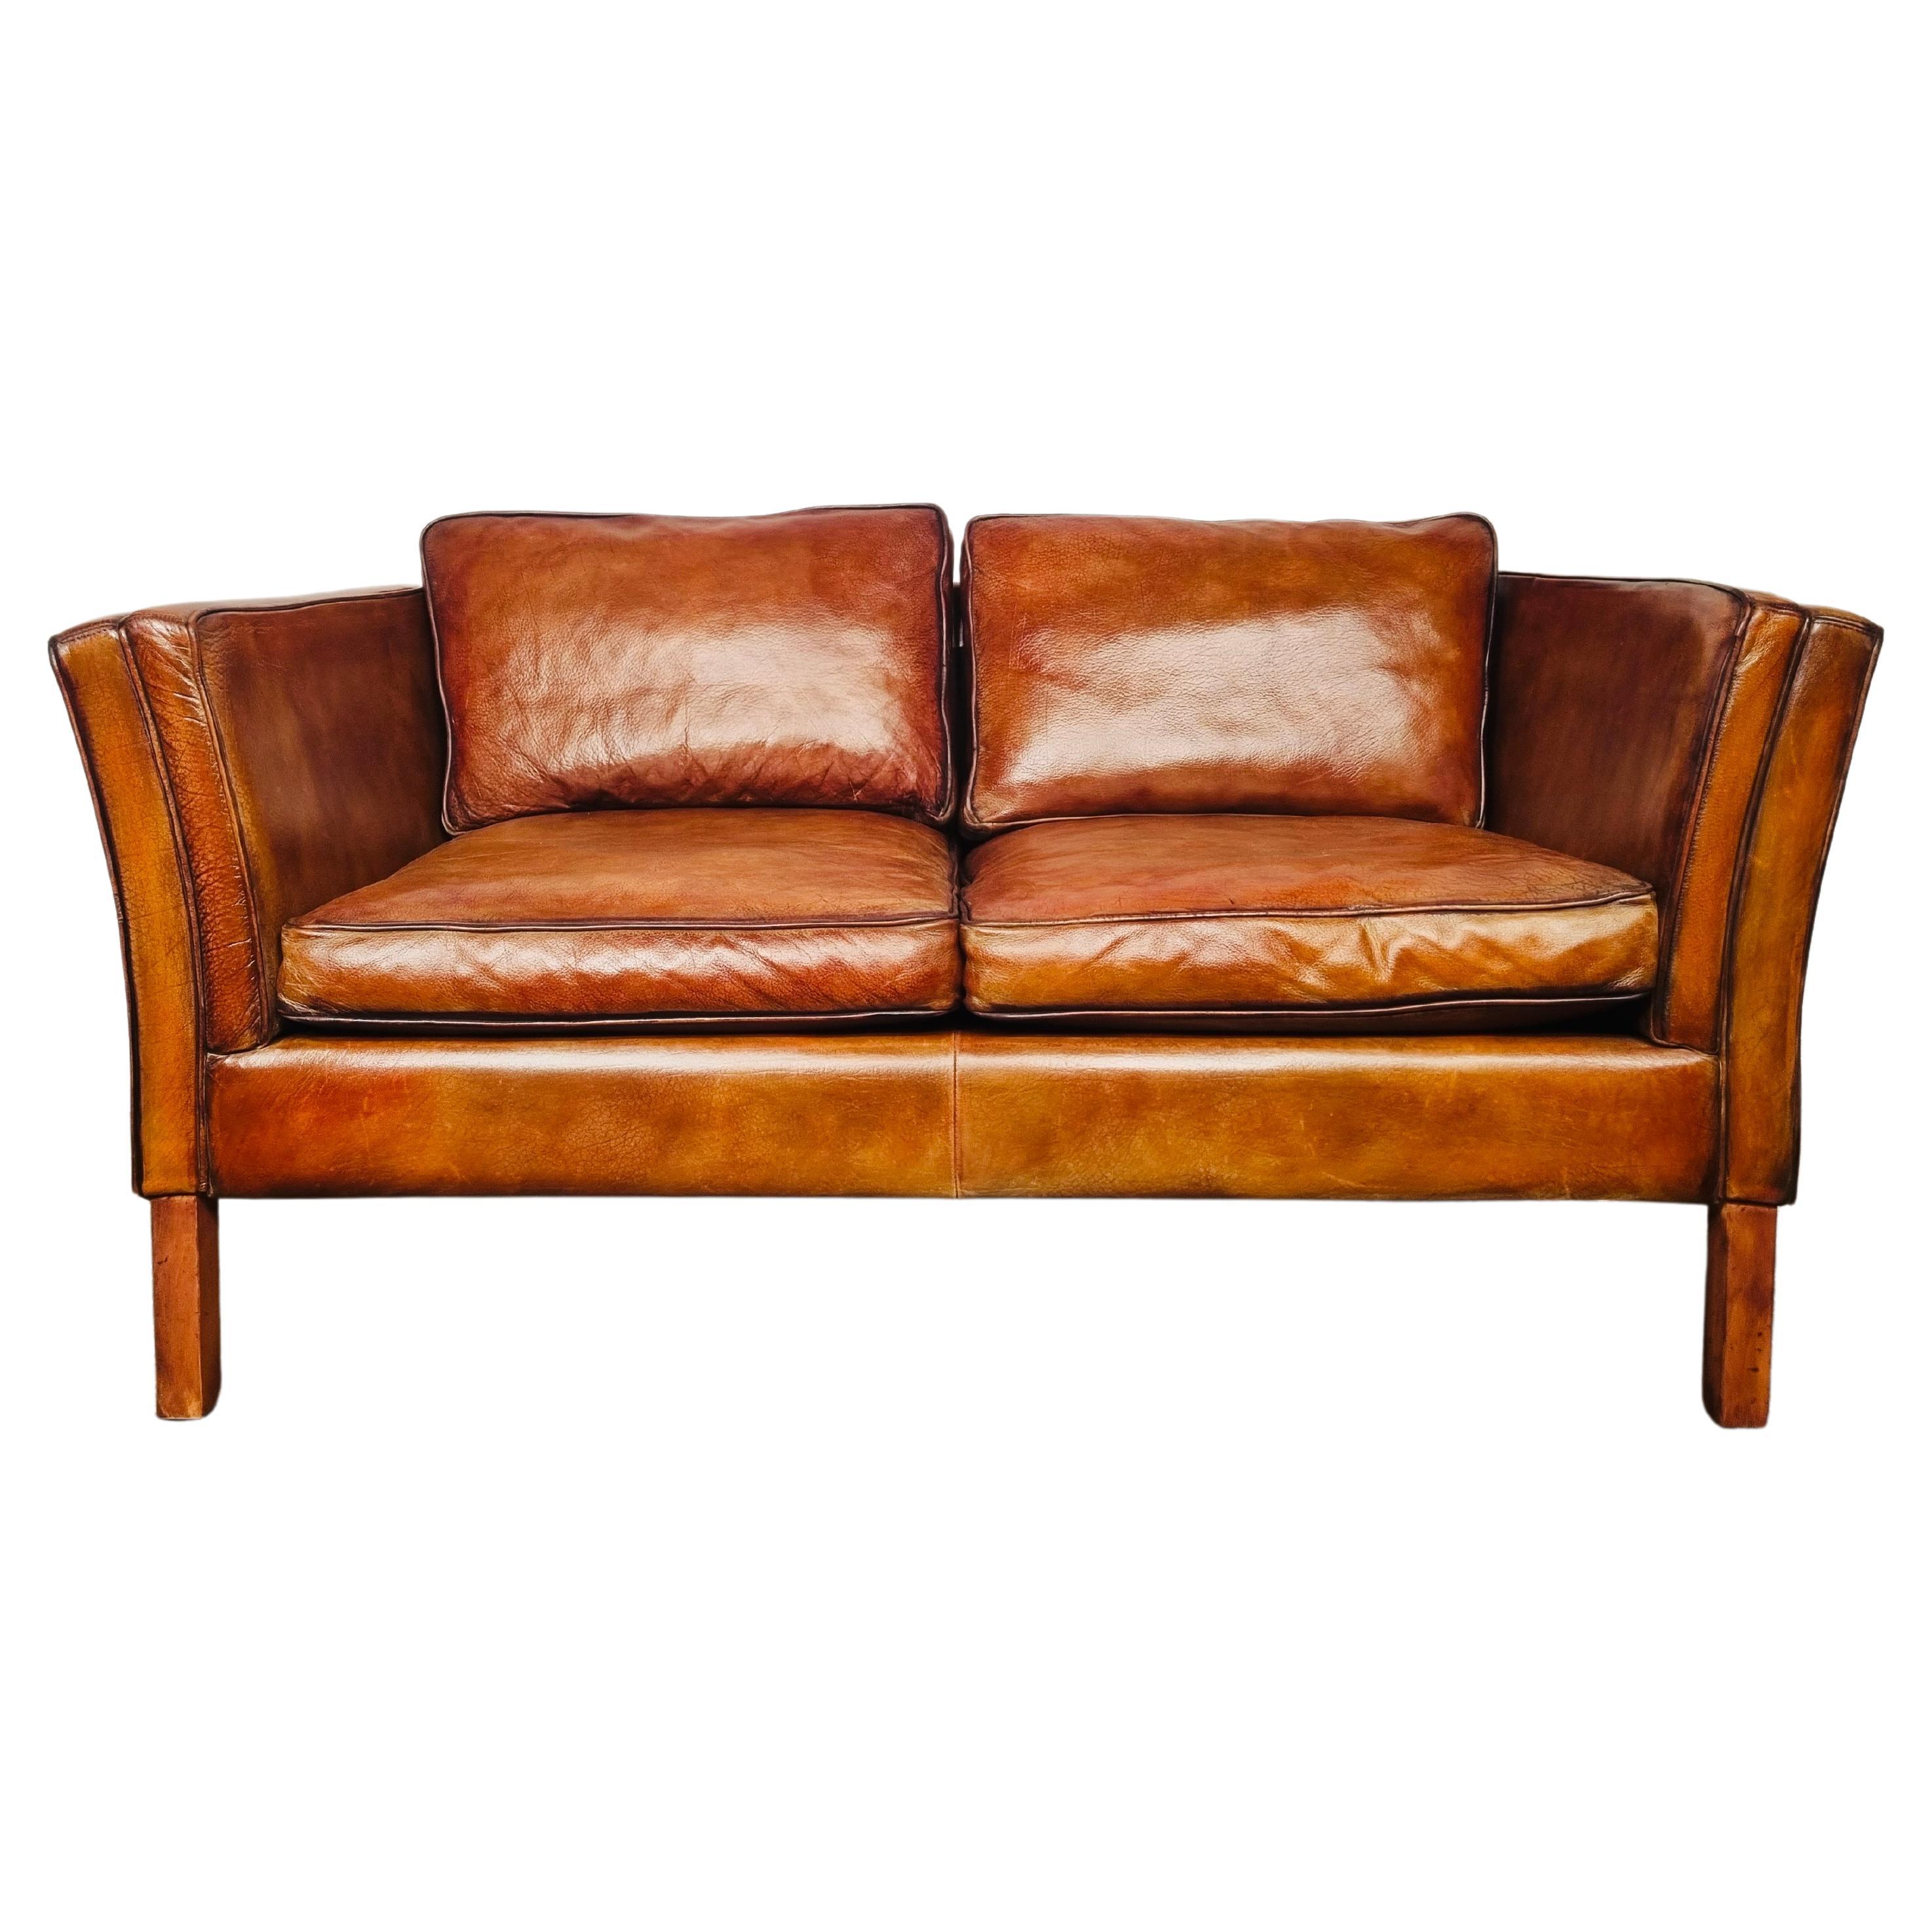 Neat Vintage Danish 70s Patinated Light Tan Two Seater Leather Sofa #679 For Sale